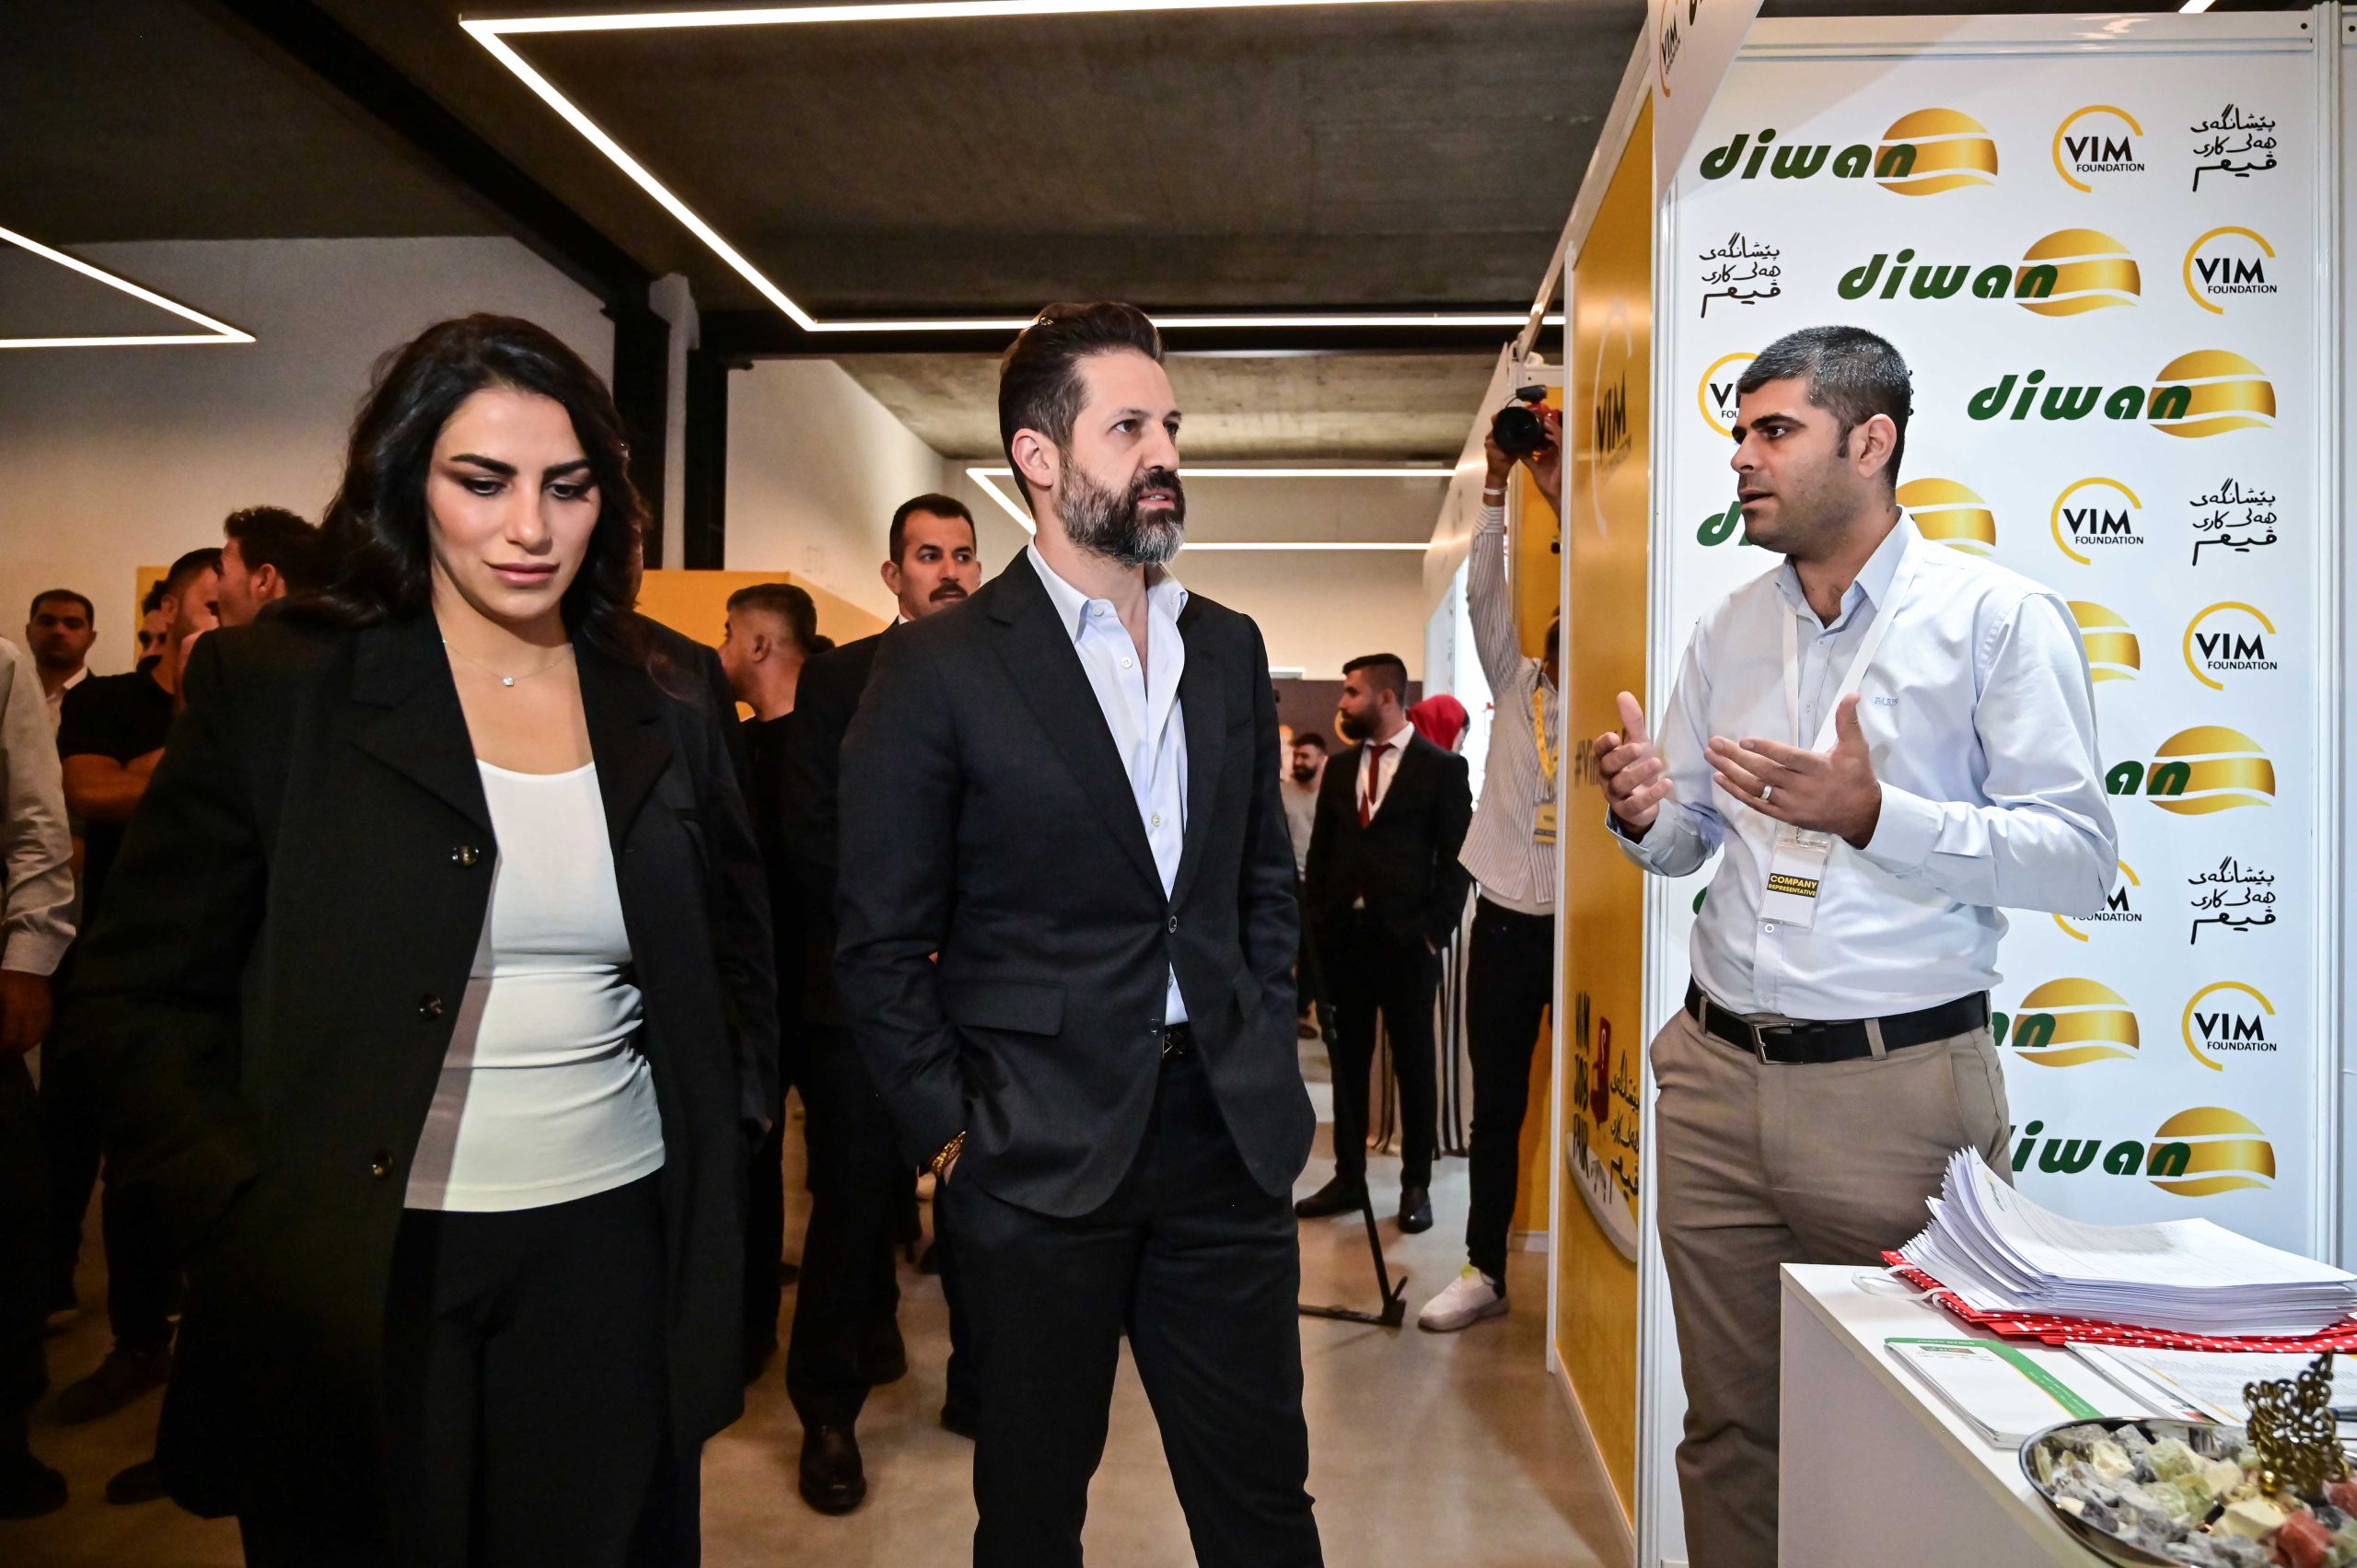 The Vim Job Fair was held in Sulaymaniyah